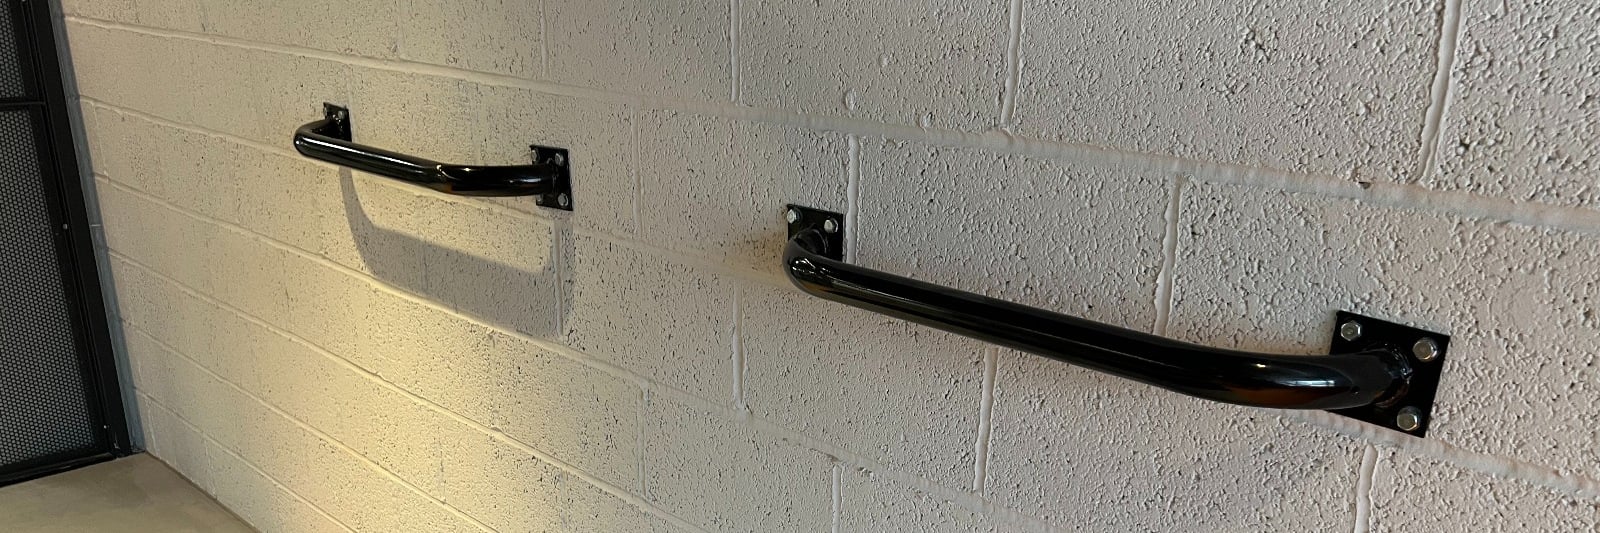 Image of a Bike Dock Solutions Wall Mounted Sheffield Bike Stands